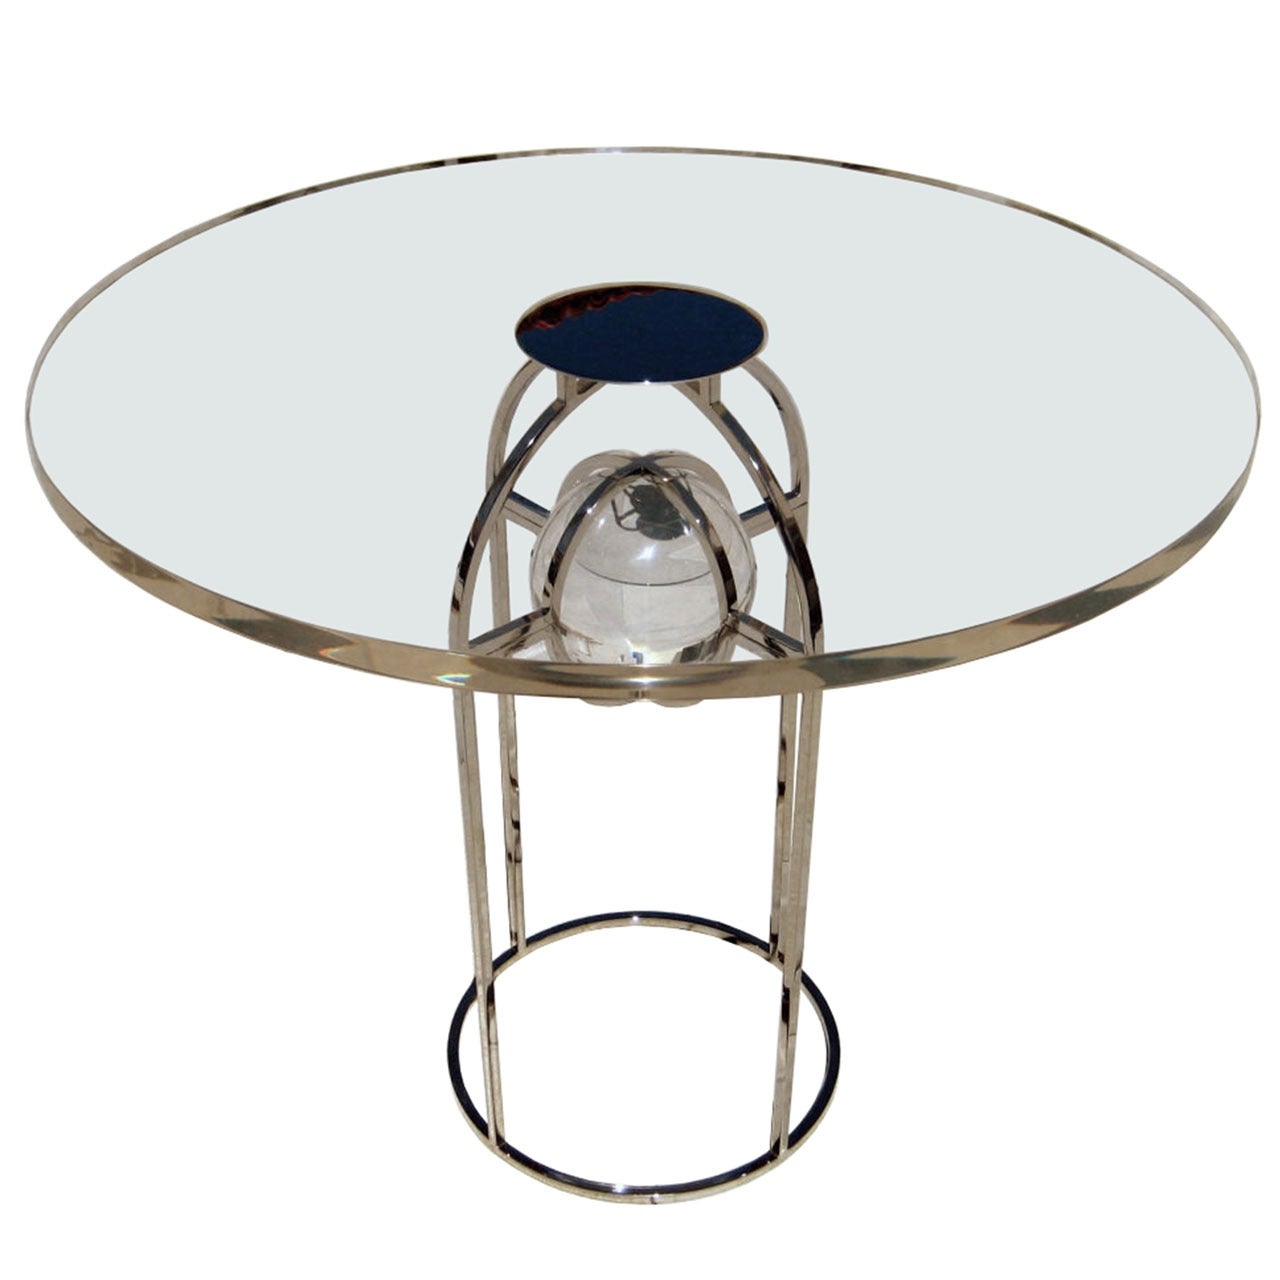 Charles Hollis Jones "Bullet" Dining Table in Nickel and Lucite, Signed